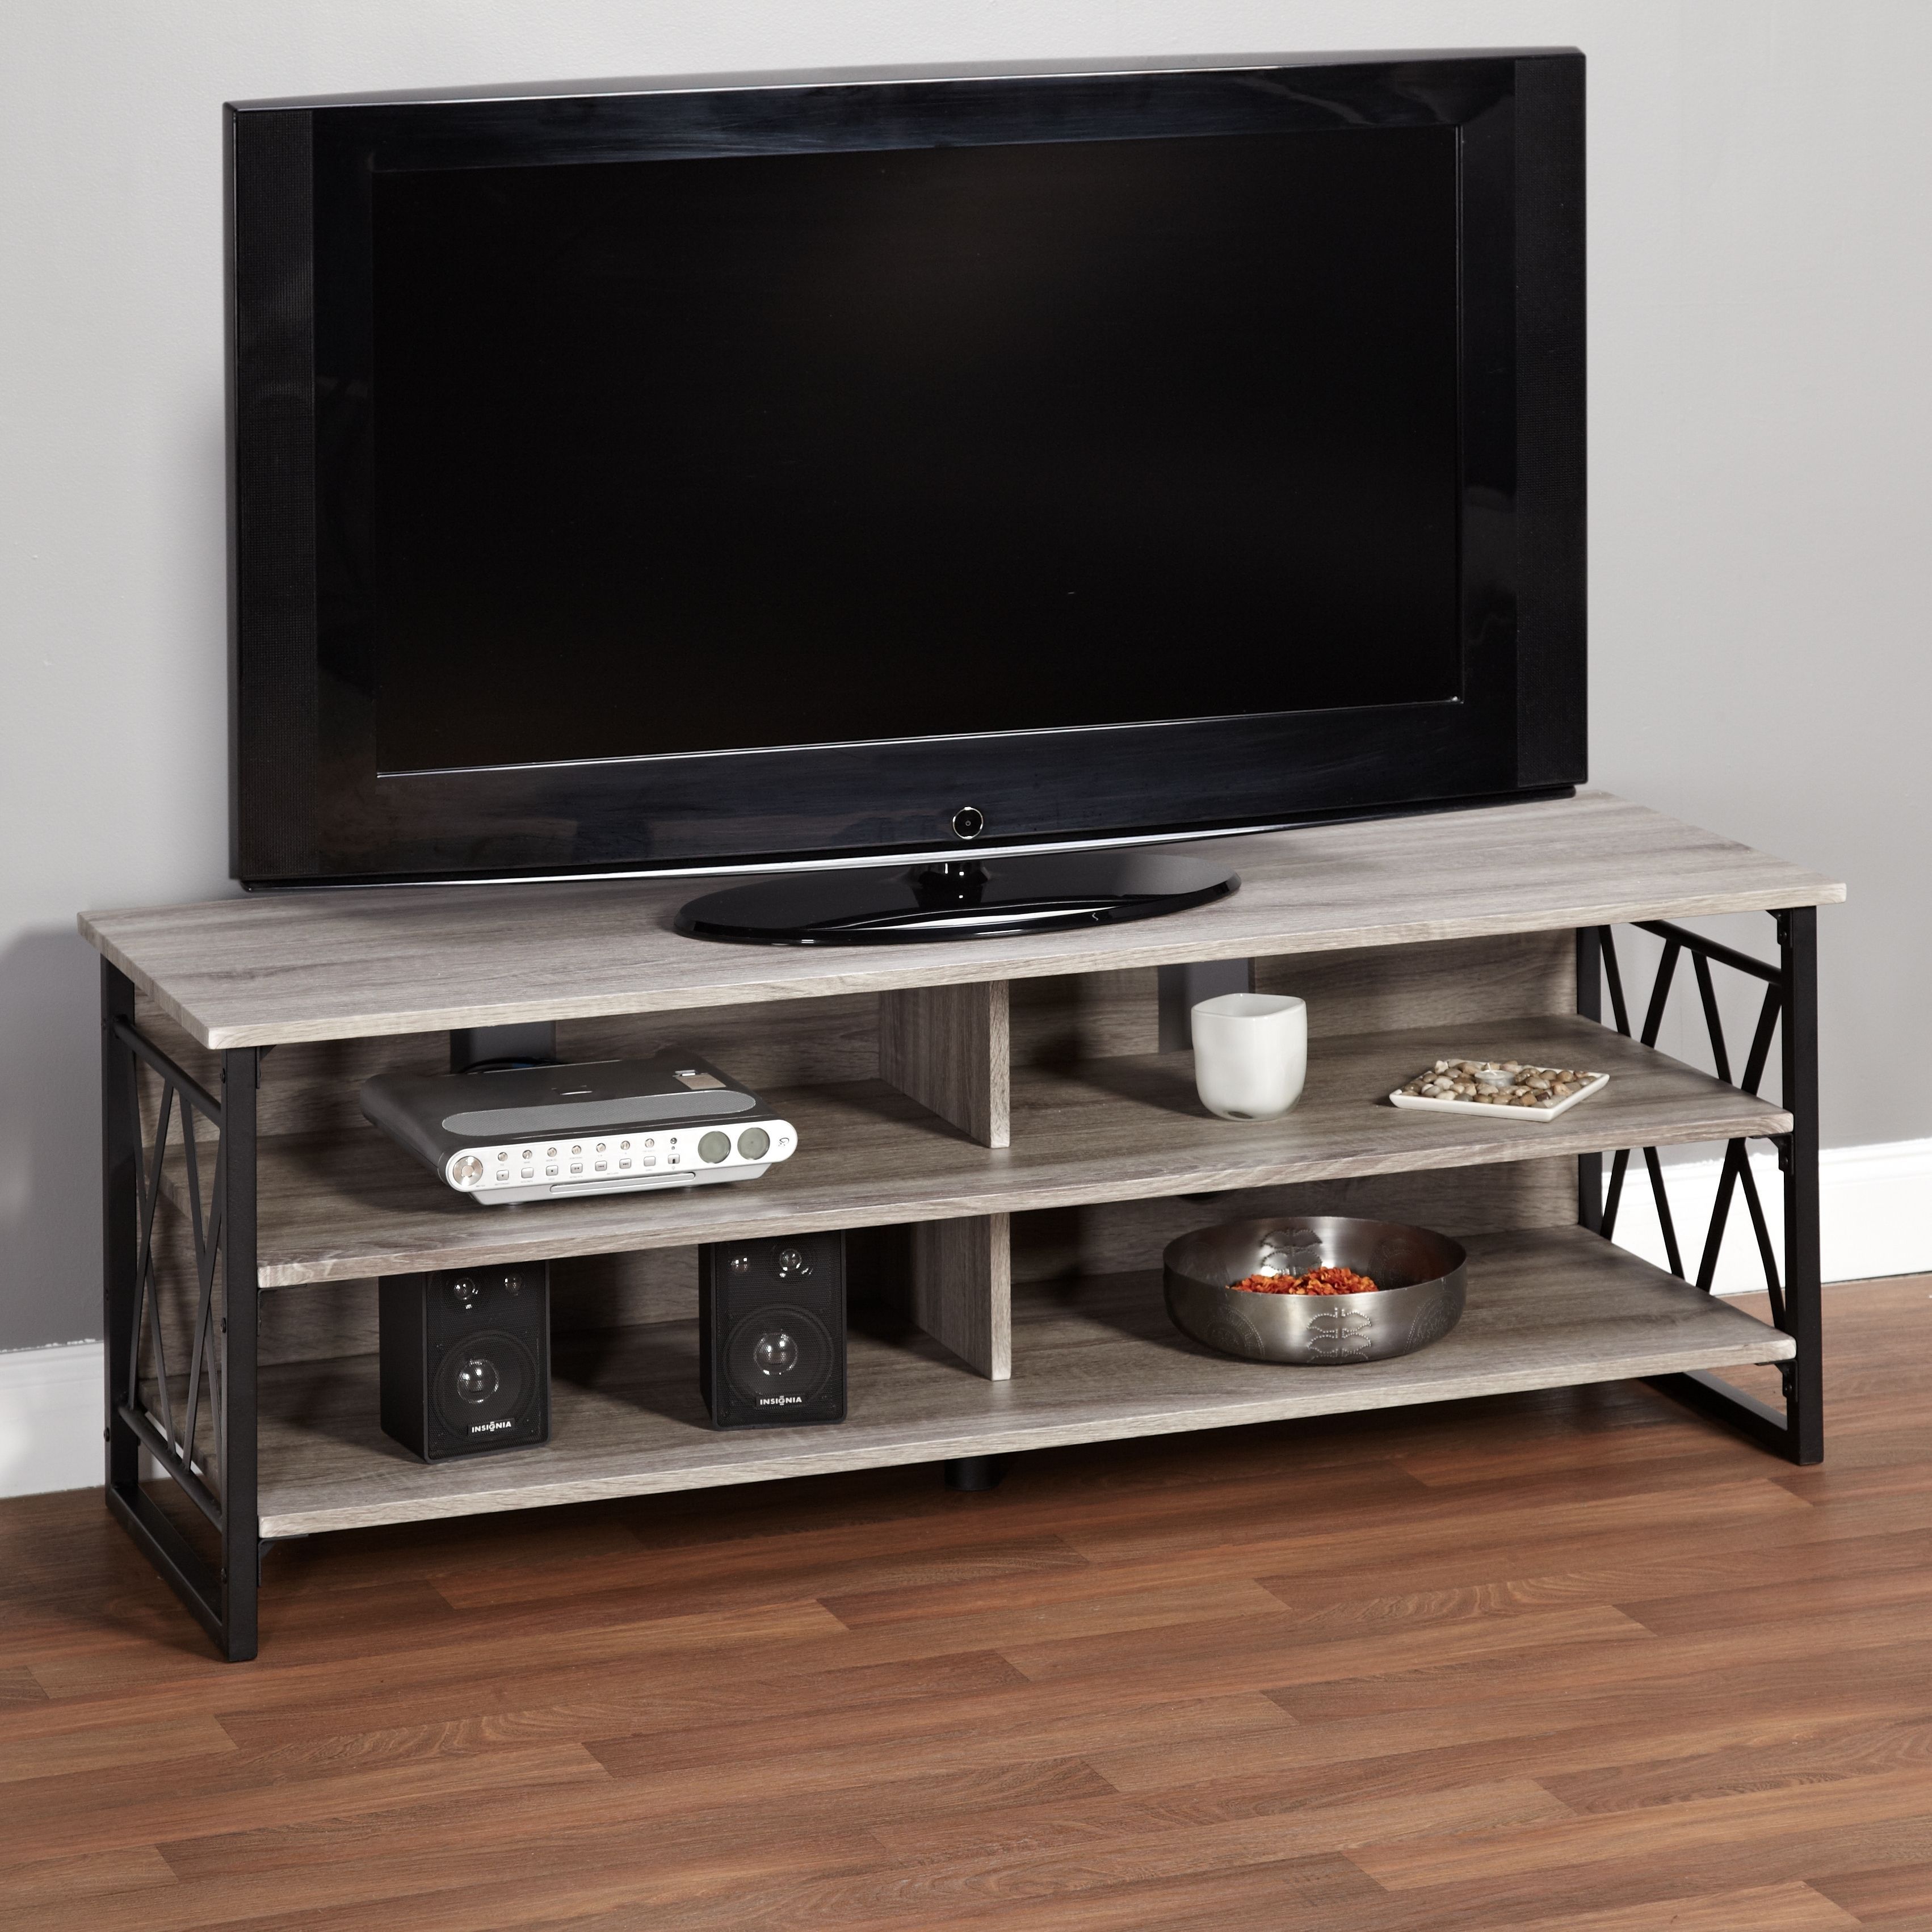 Sauder Tv Stand with Fireplace Inspirational Update Your Living Room with 60 Inch Tv Stand X Shaped